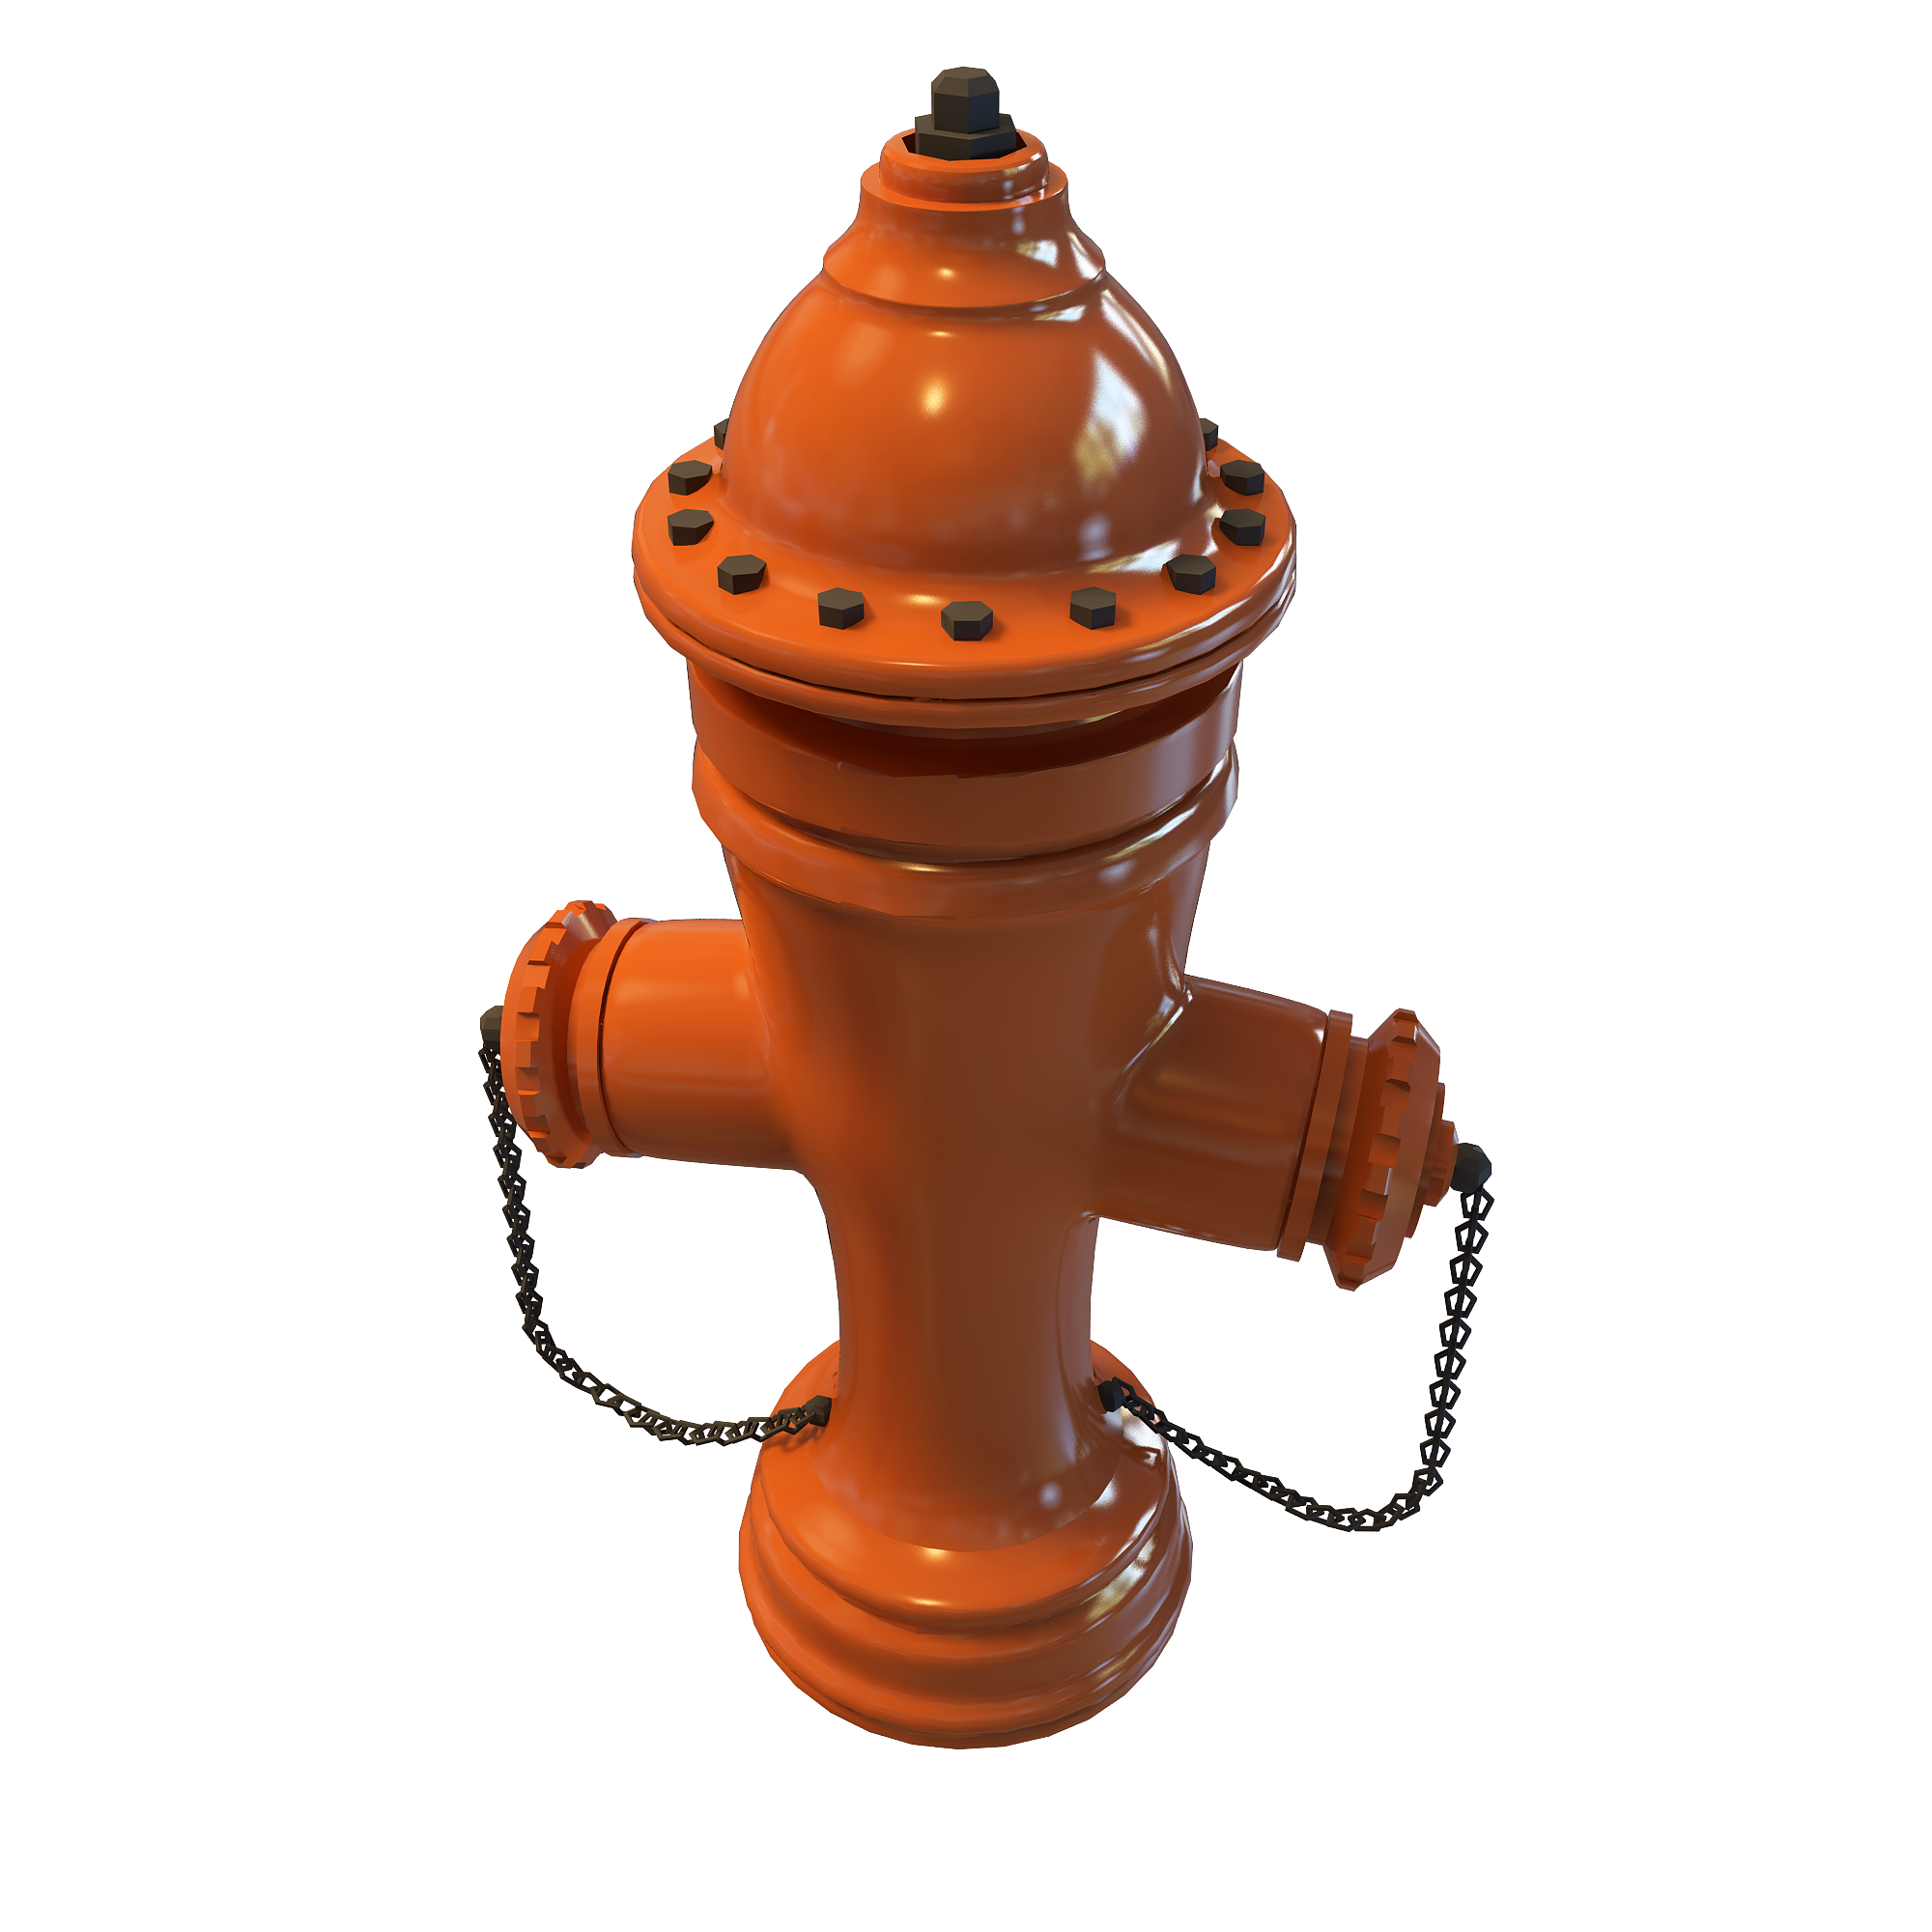 Fire Hydrant Photos PNG Free Photo PNG Image